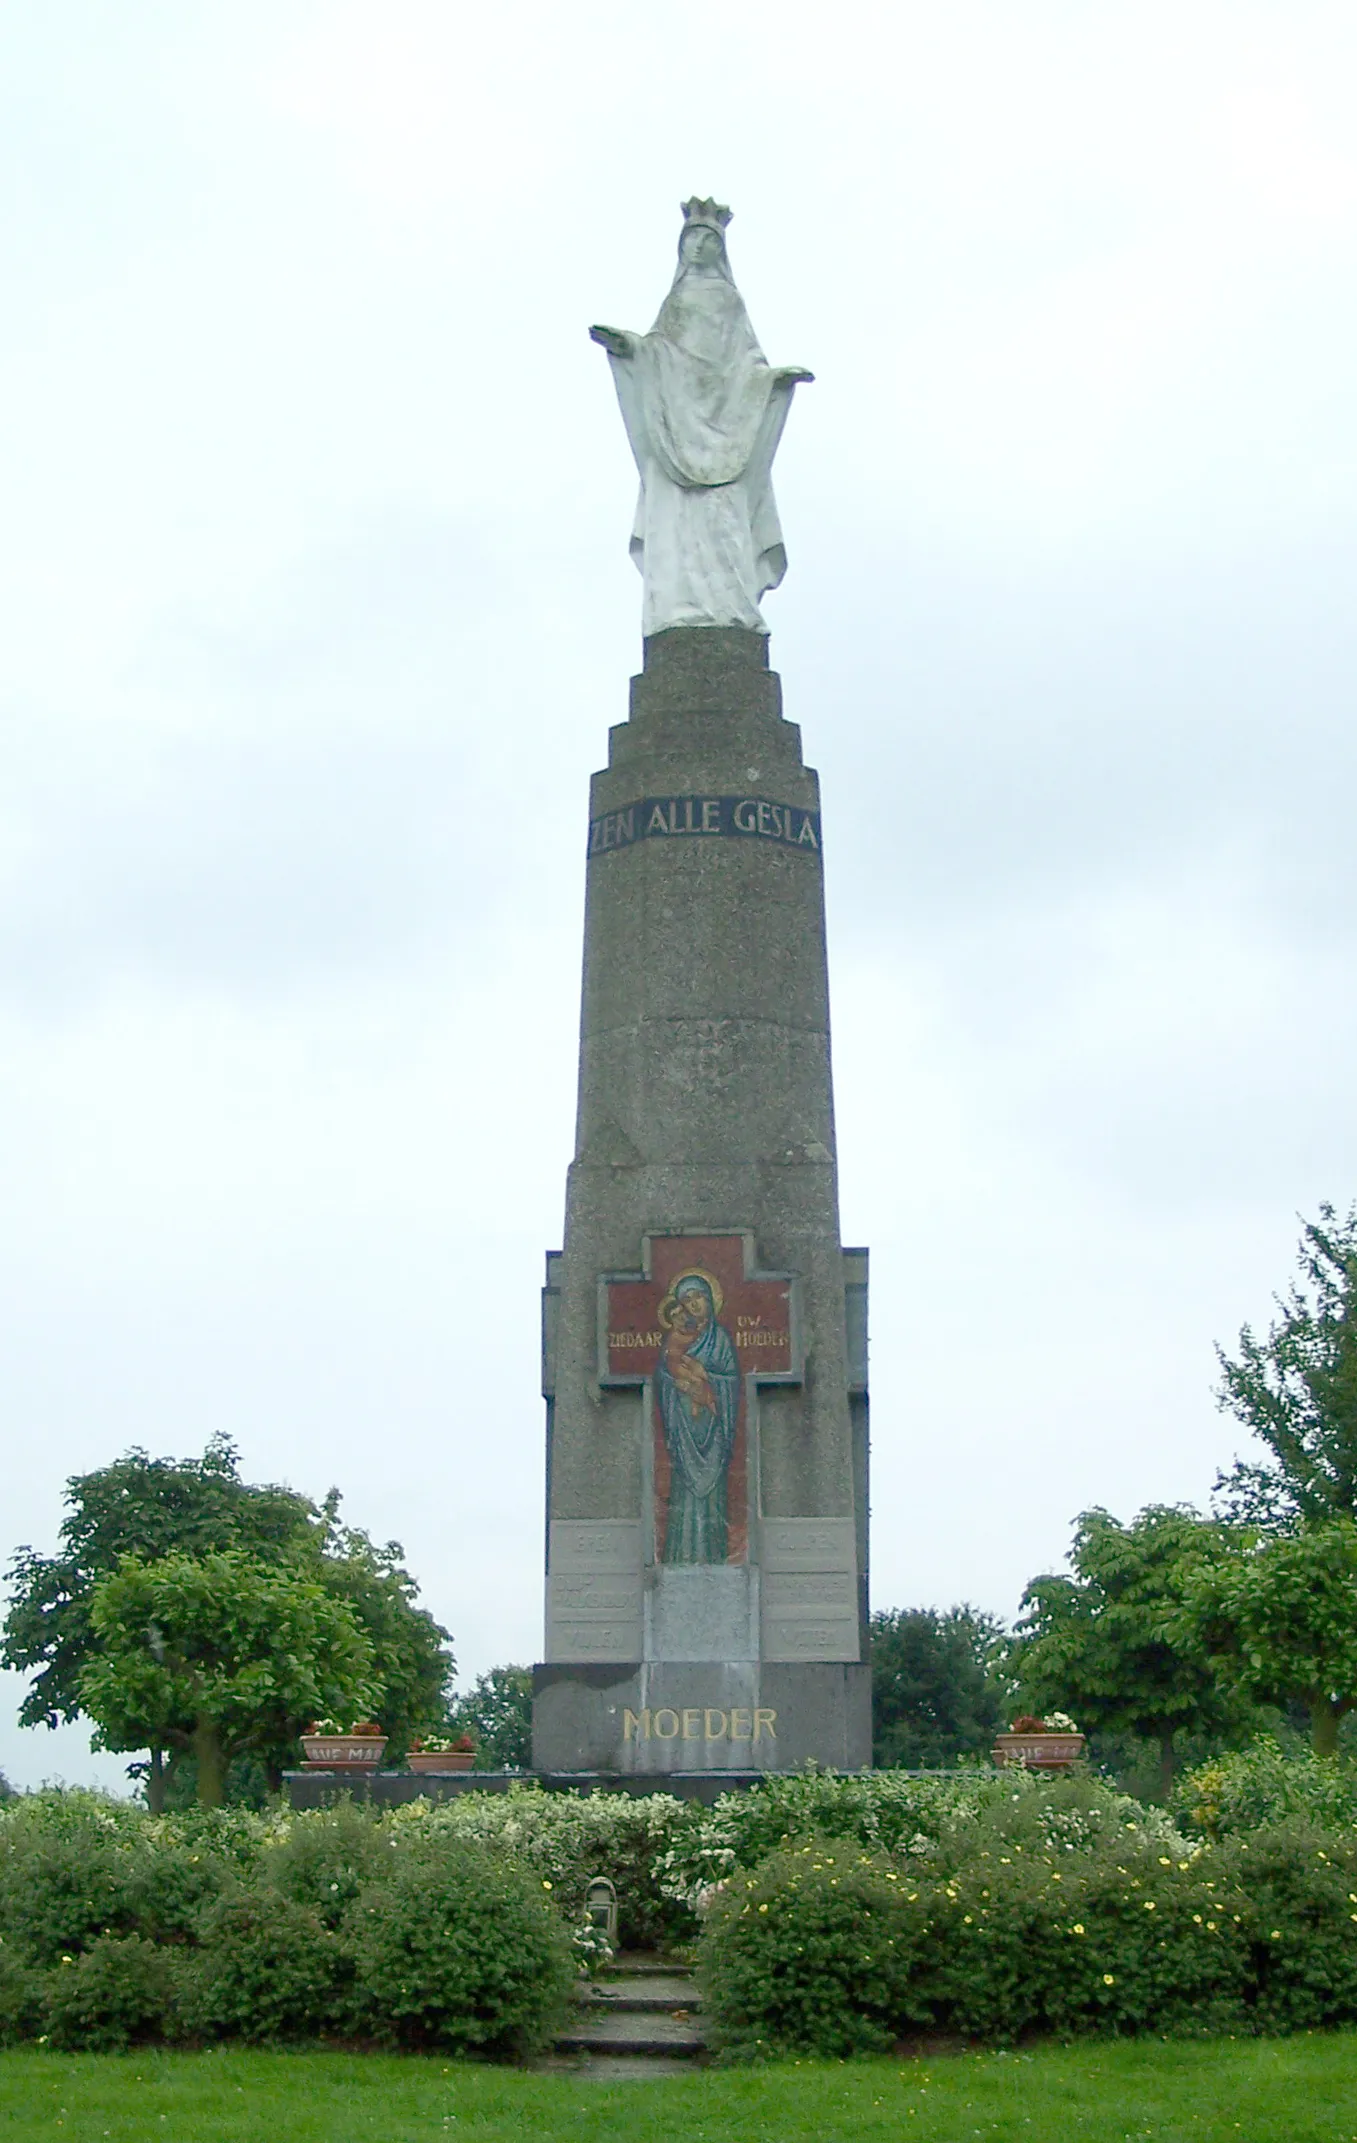 Photo showing: Monument of Maria, designed by Piet Gerrits with a sculpture of Maria by Charles Vos in 1935. Placed at the Gulpenerberg in Gulpen.